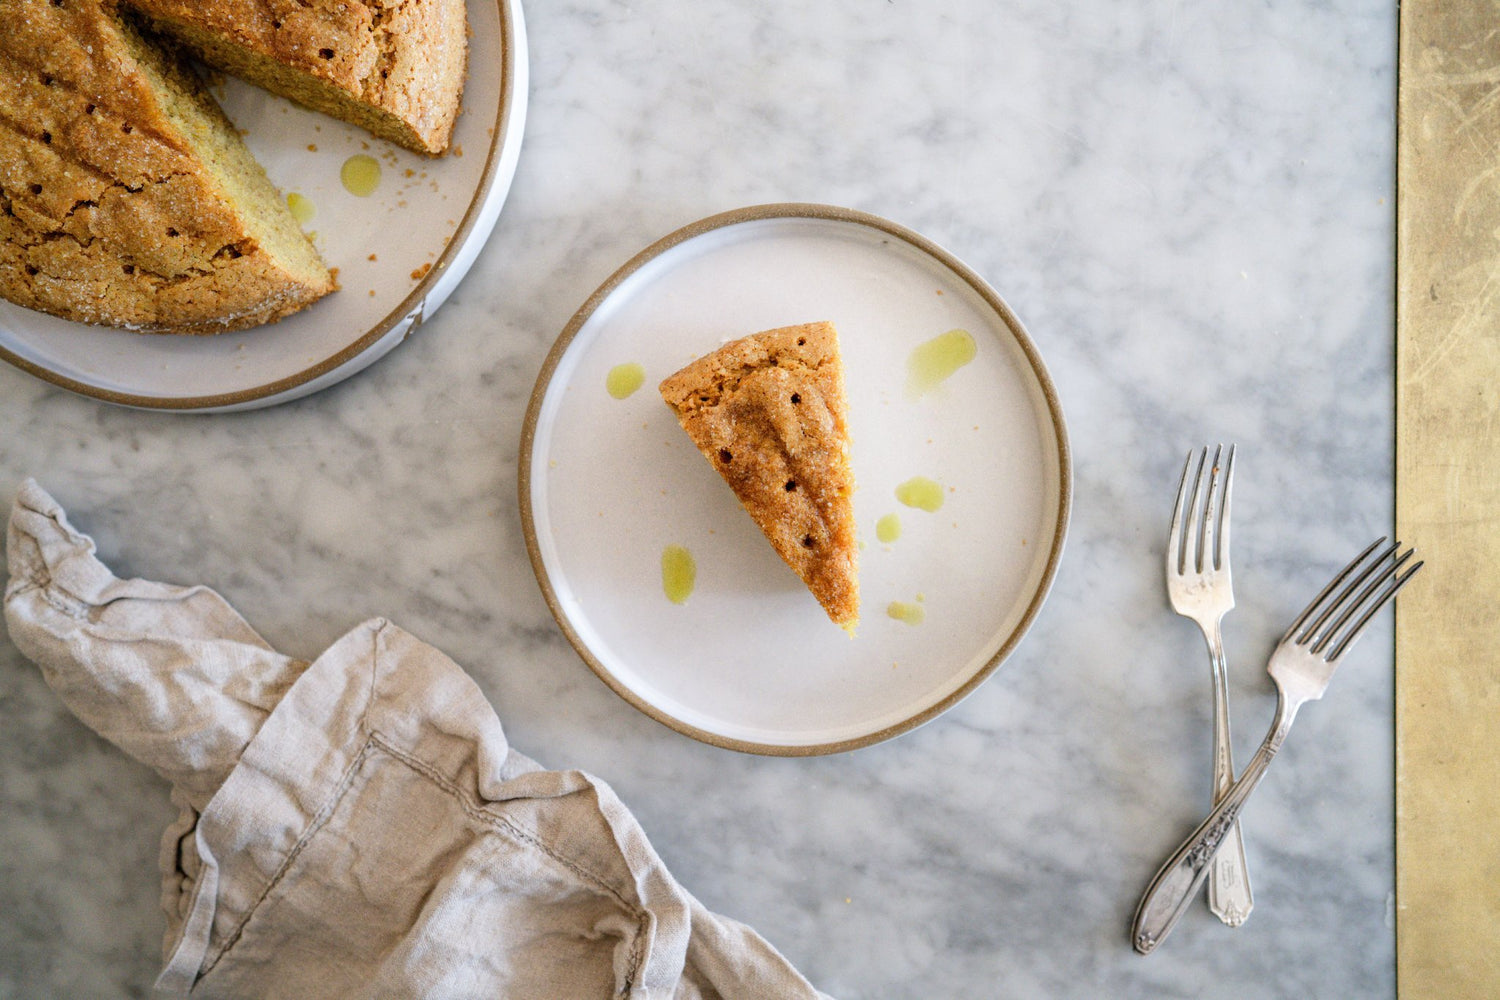 BrightRx: The Best Olive Oil Cake Ever